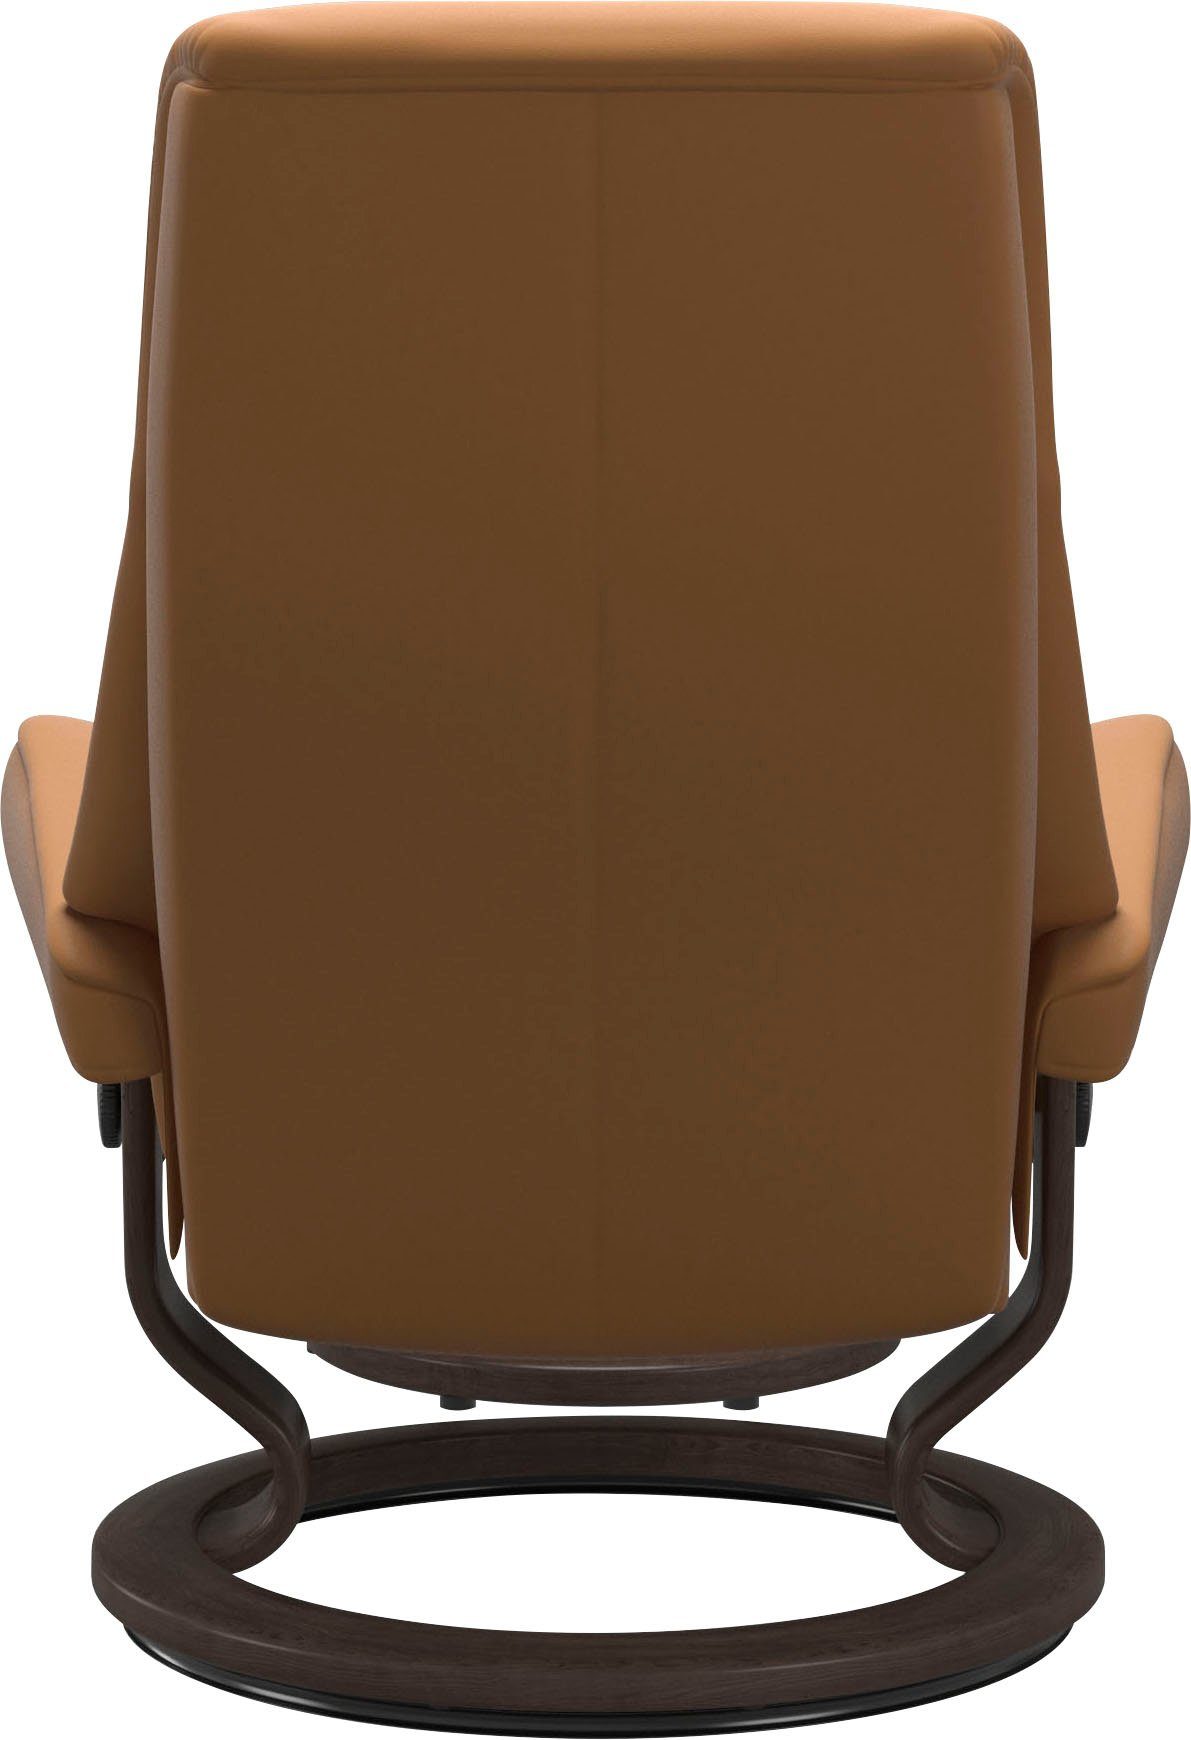 Base, Größe Stressless® mit Wenge Relaxsessel Classic View, S,Gestell